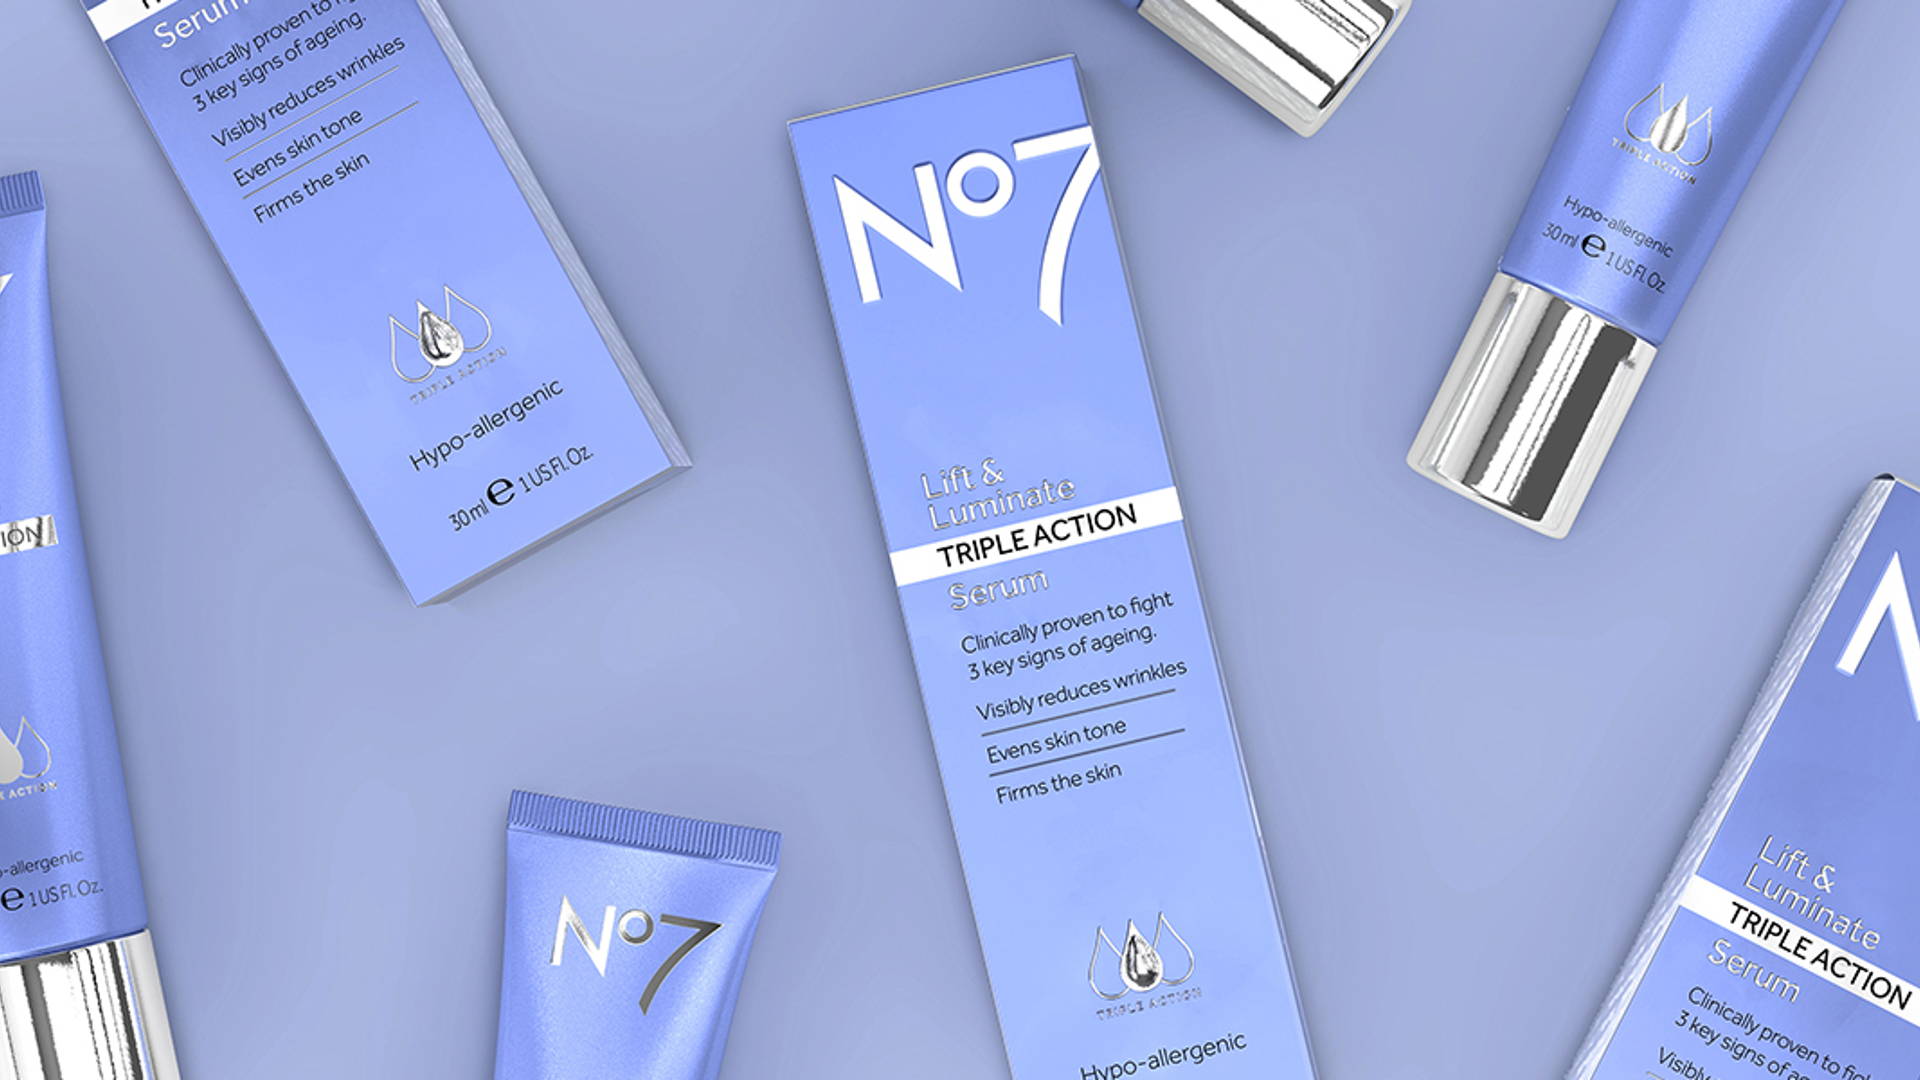 Featured image for No7 Lift & Luminate TRIPLE ACTION Serum